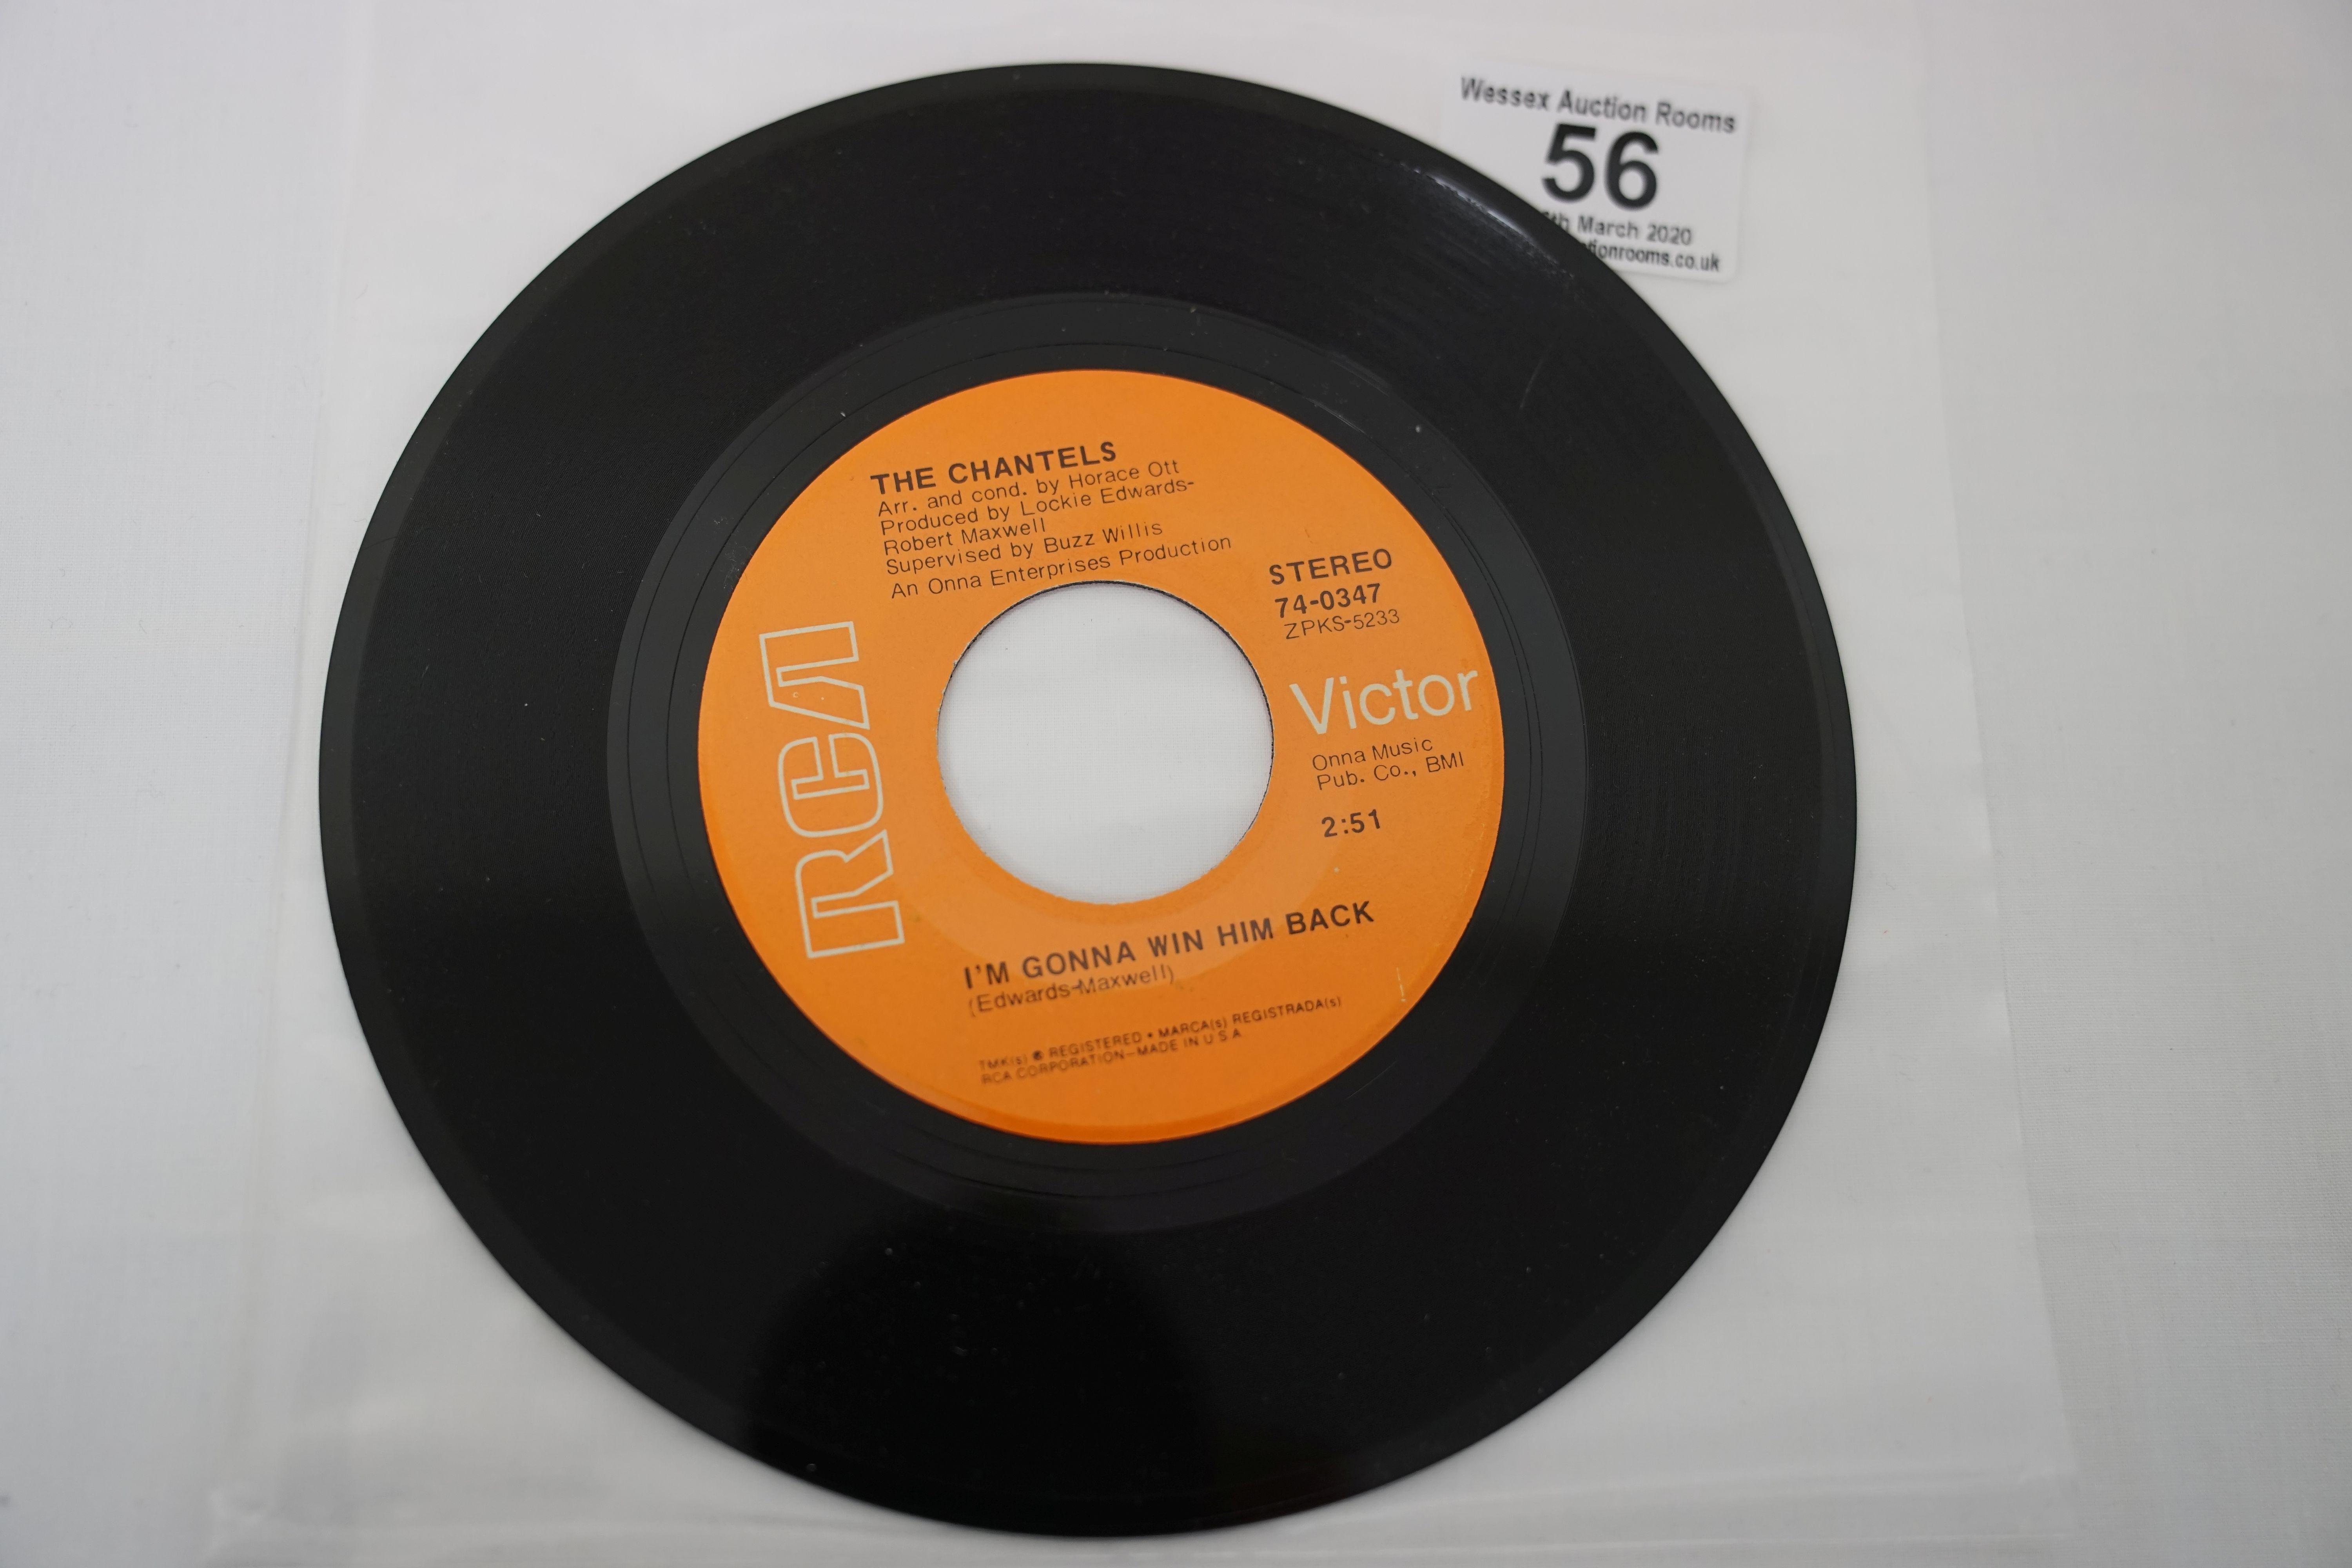 Vinyl - 5 Rare original US 1st pressing copies Northern Soul singles on RCA Victor Records. The - Image 23 of 29